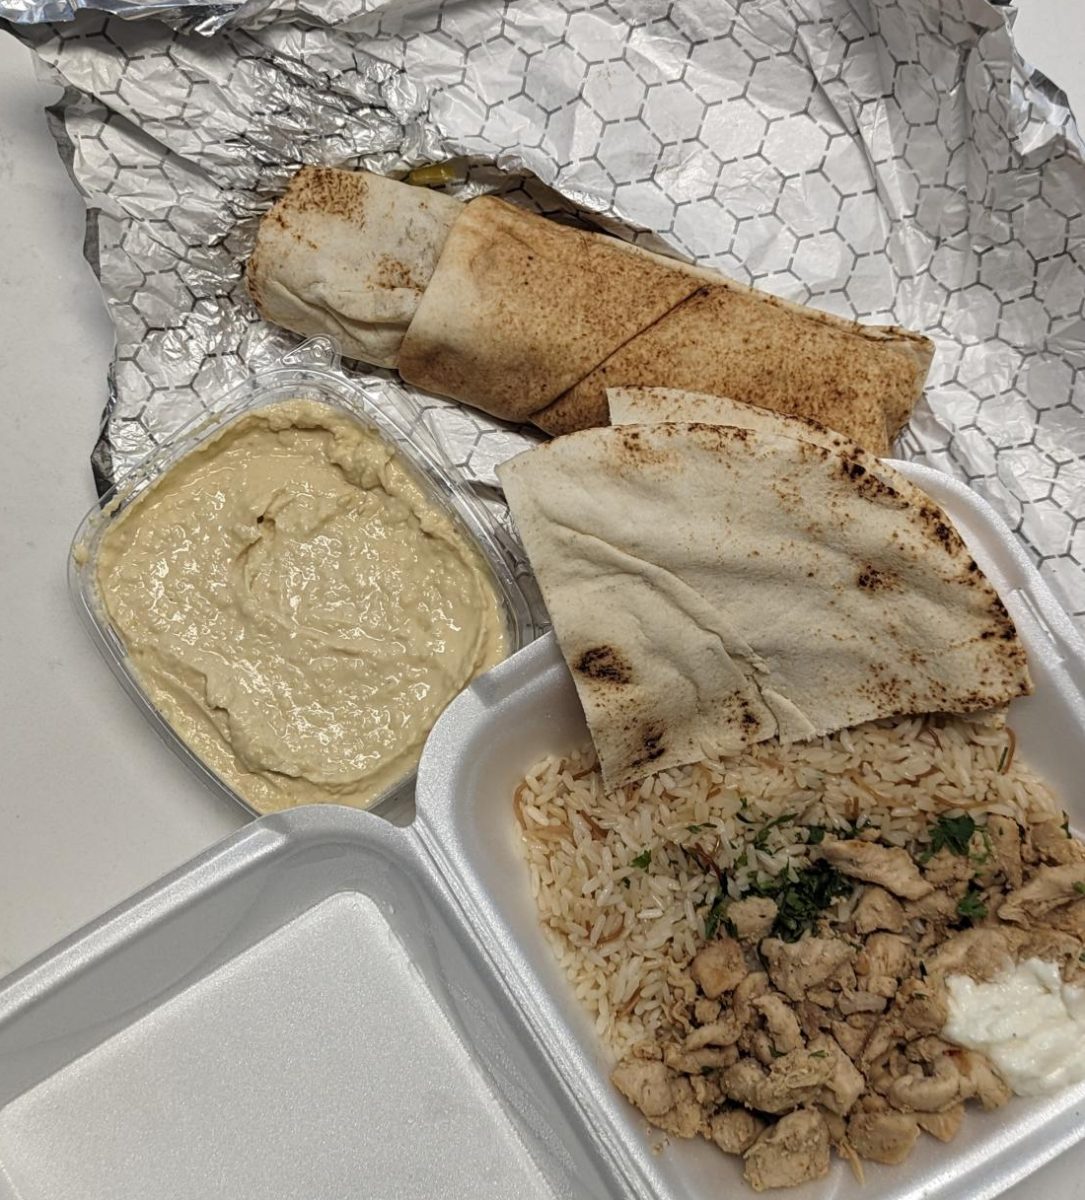 At+the+Raleigh+%E2%80%9CTaste+of+Lebanon%E2%80%9D+cultural+festival+various+Lebanese+foods+were+offered+for+visitors+to+try.+Pictured+above+%28clockwise%29+is+a+chicken+shawarma+sandwich%2C+chicken+shawarma+rice+platter%2C+and+hummus.%0A